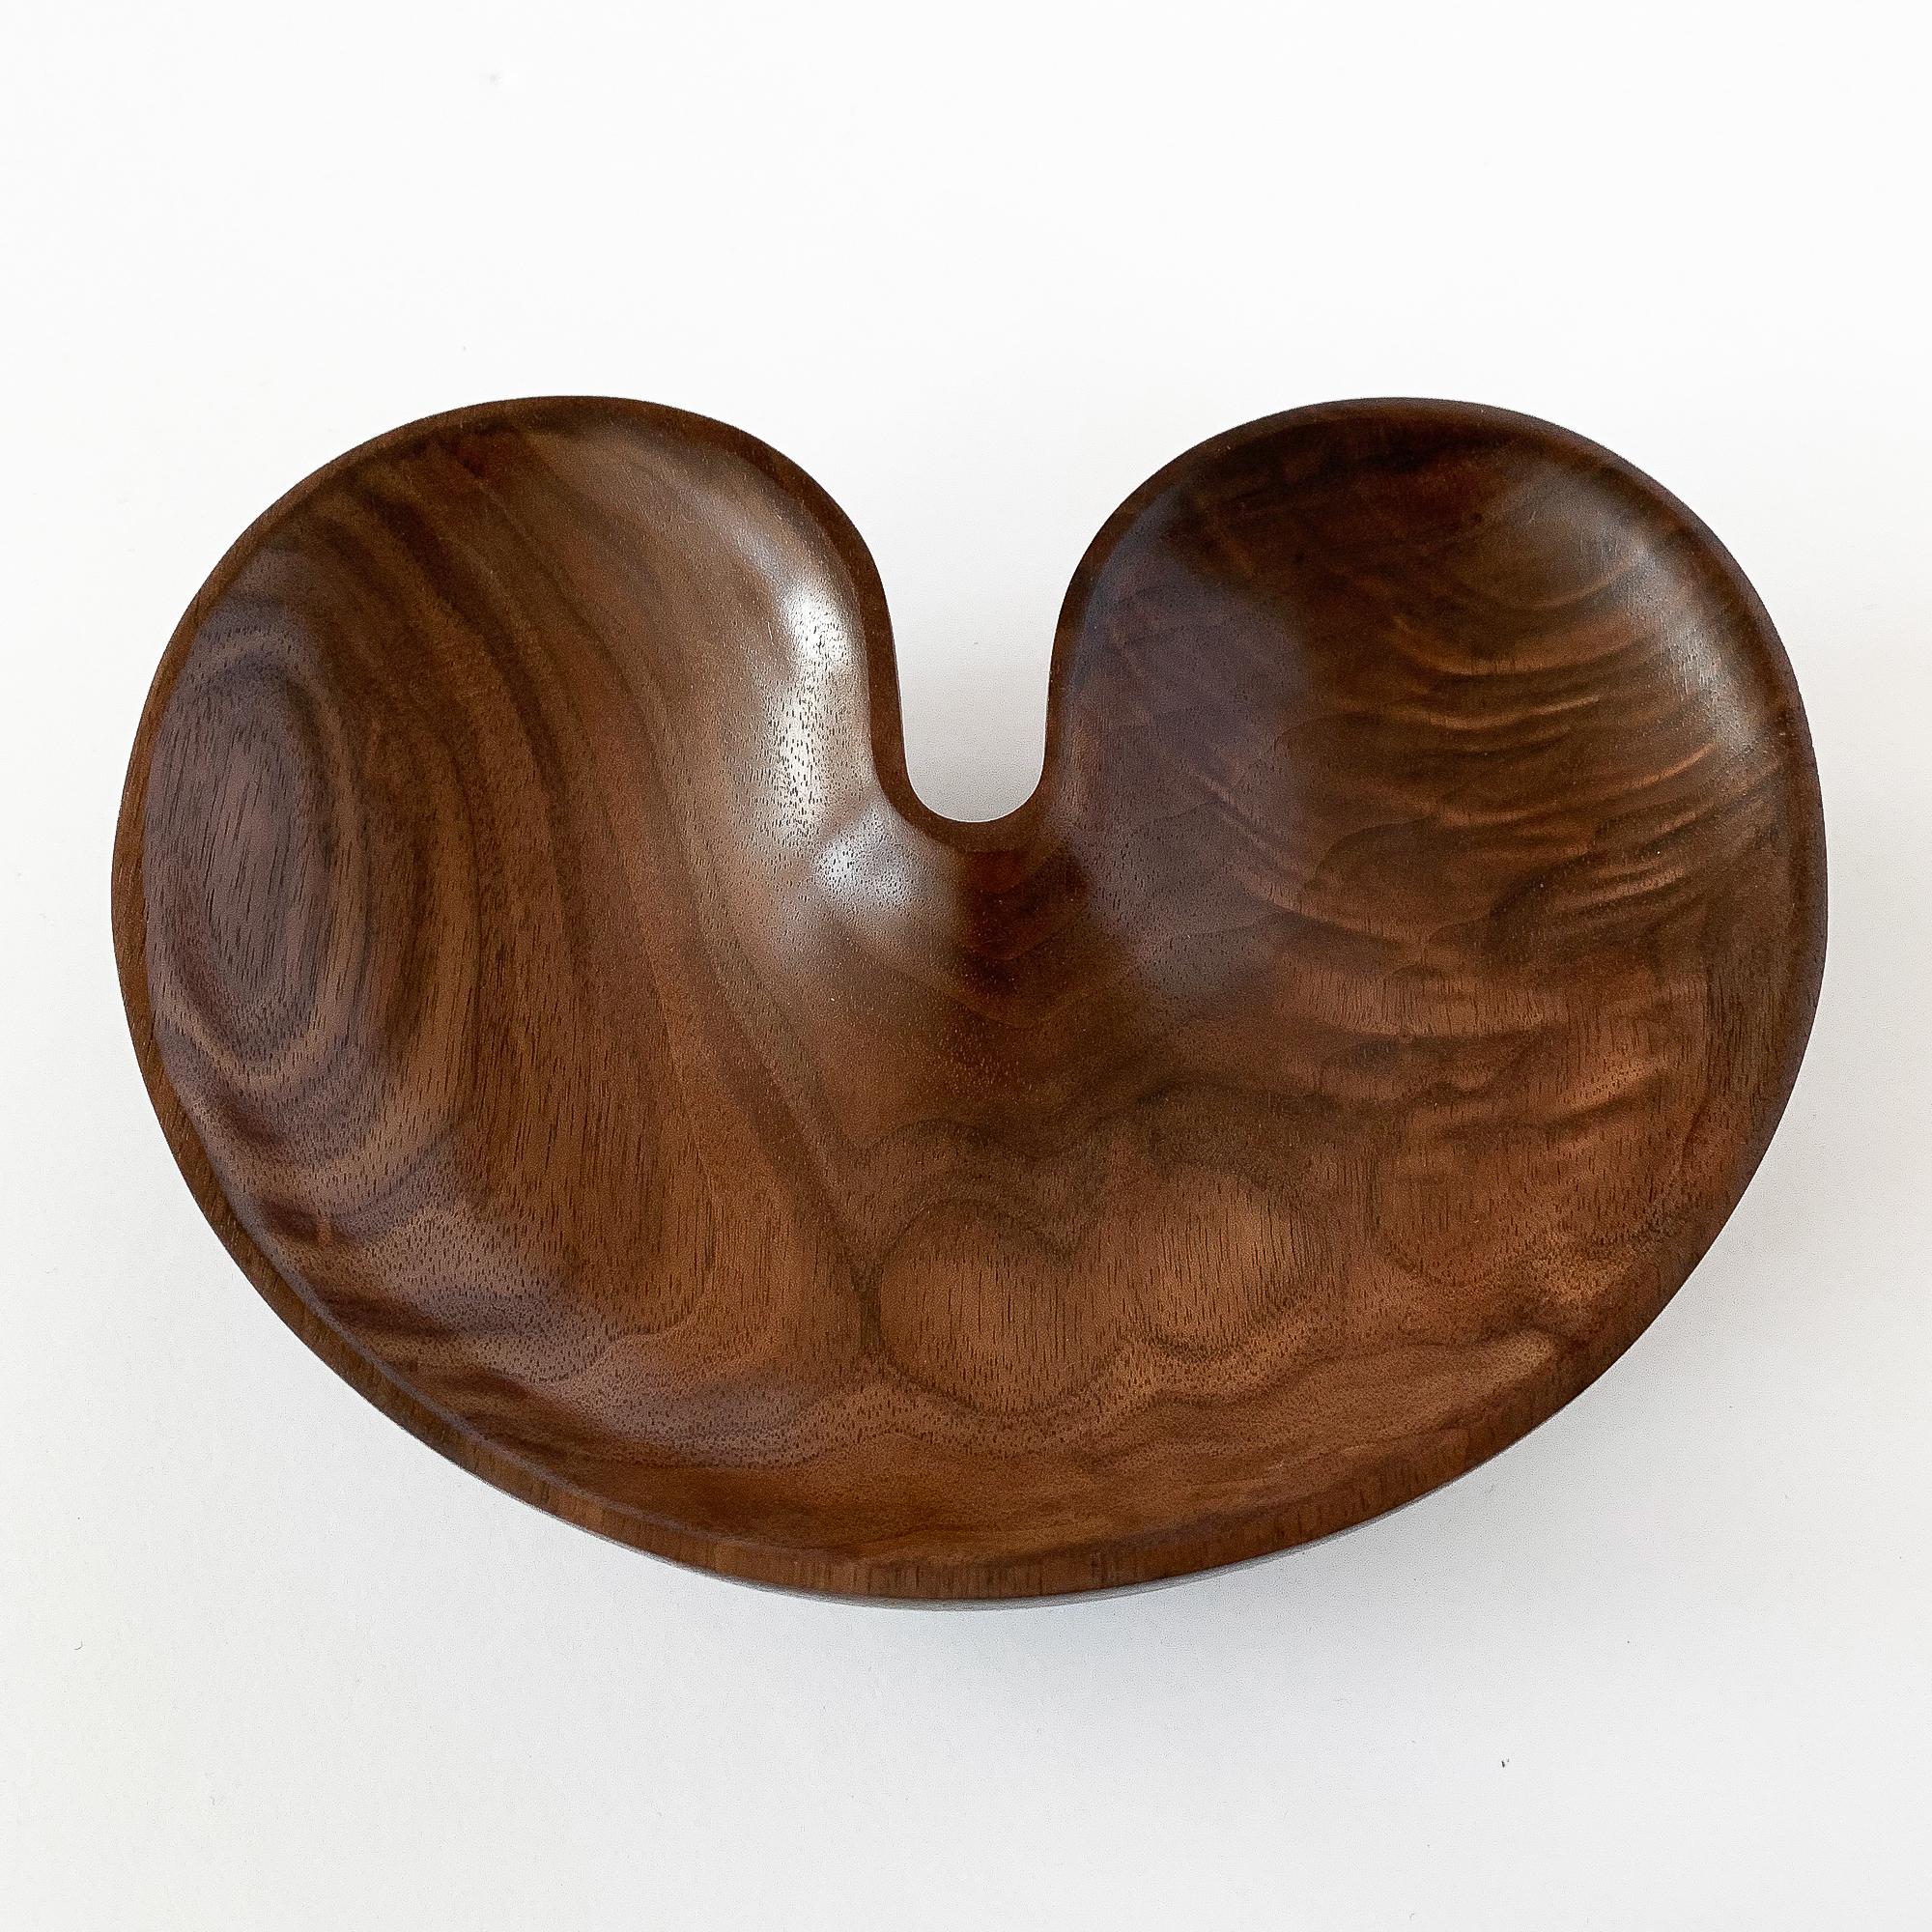 American Sculptural Hand Carved Walnut Bowl by Foxwood Co.